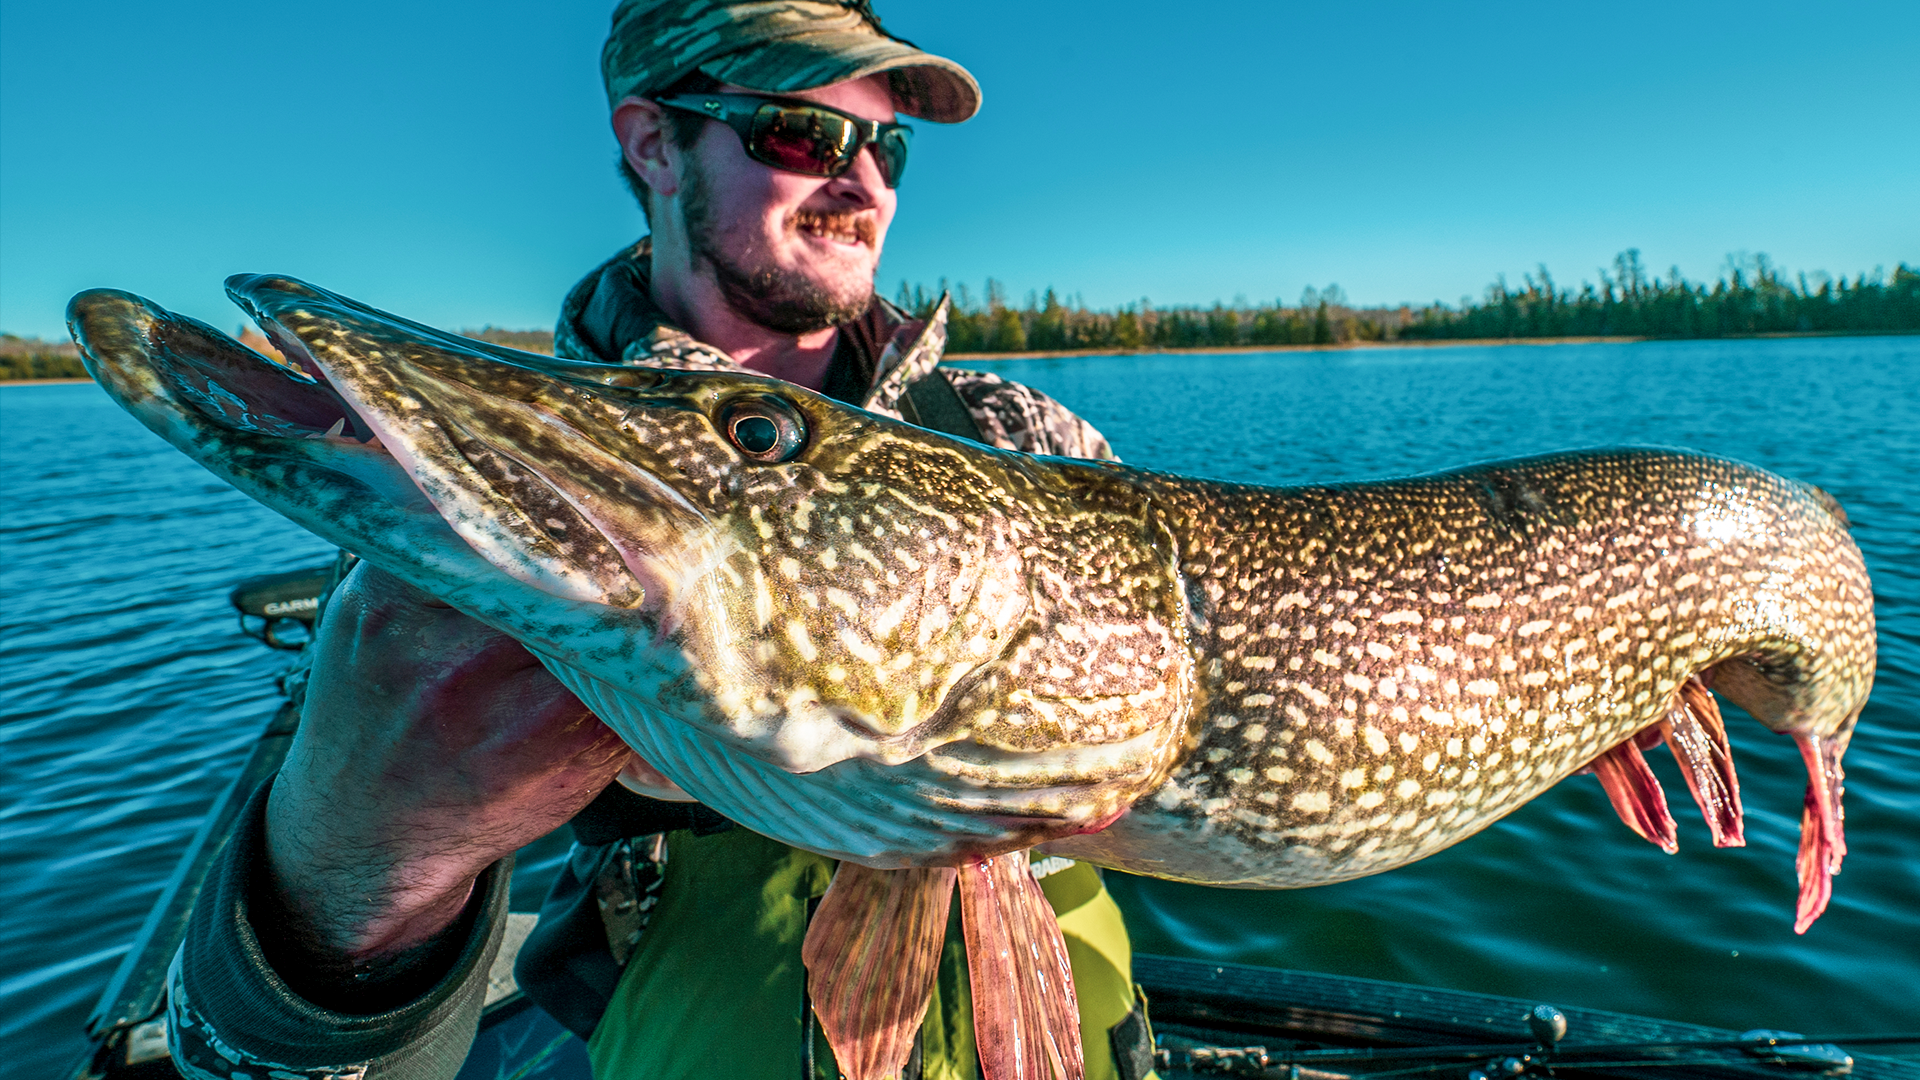 https://assets.wired2fish.com/uploads/2021/11/big-pike.png